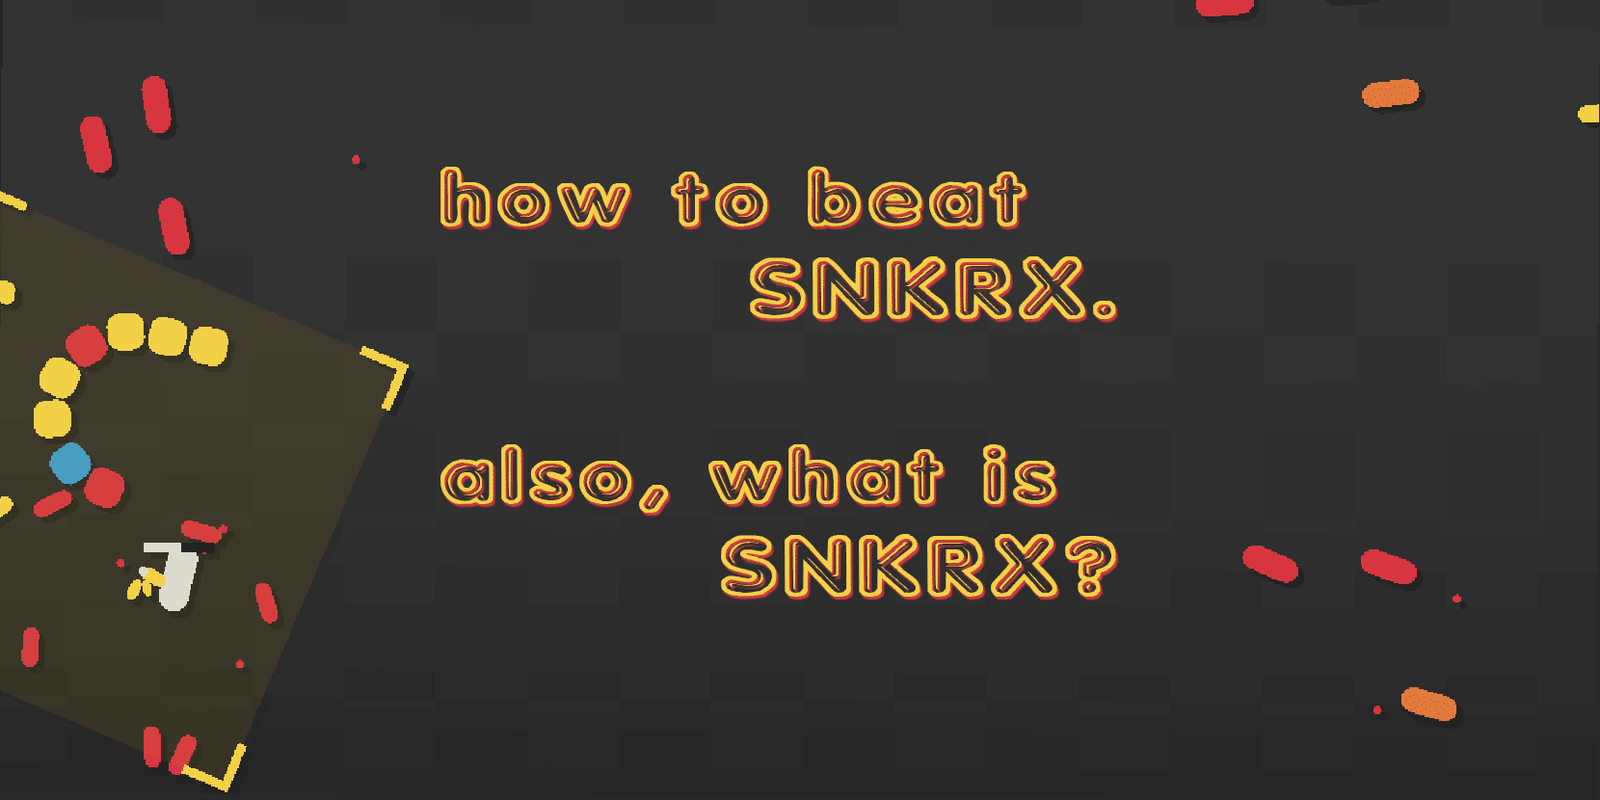 How to Beat SNKRX. Also, What is SNKRX?